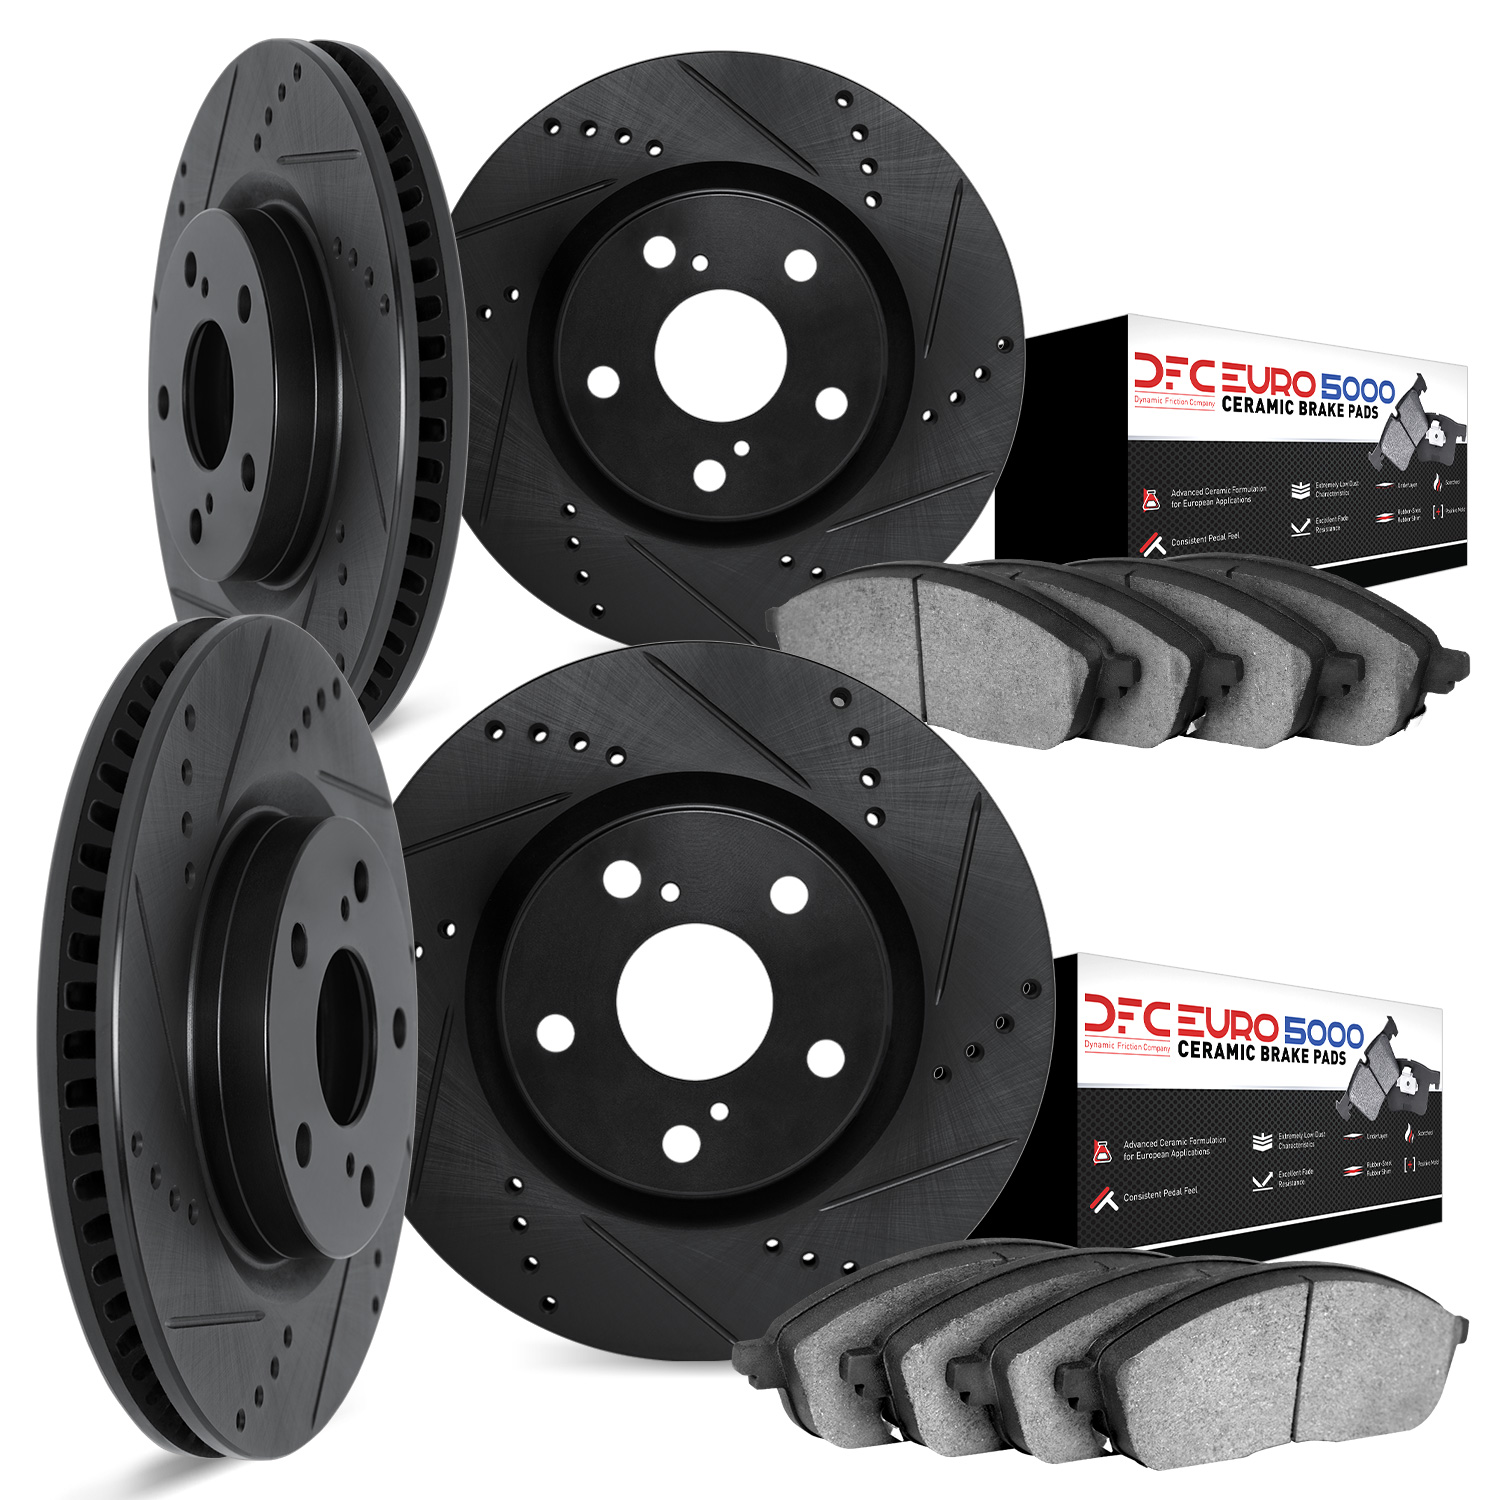 8604-11004 Drilled/Slotted Brake Rotors w/5000 Euro Ceramic Brake Pads Kit [Black], 2006-2009 Land Rover, Position: Front and Re